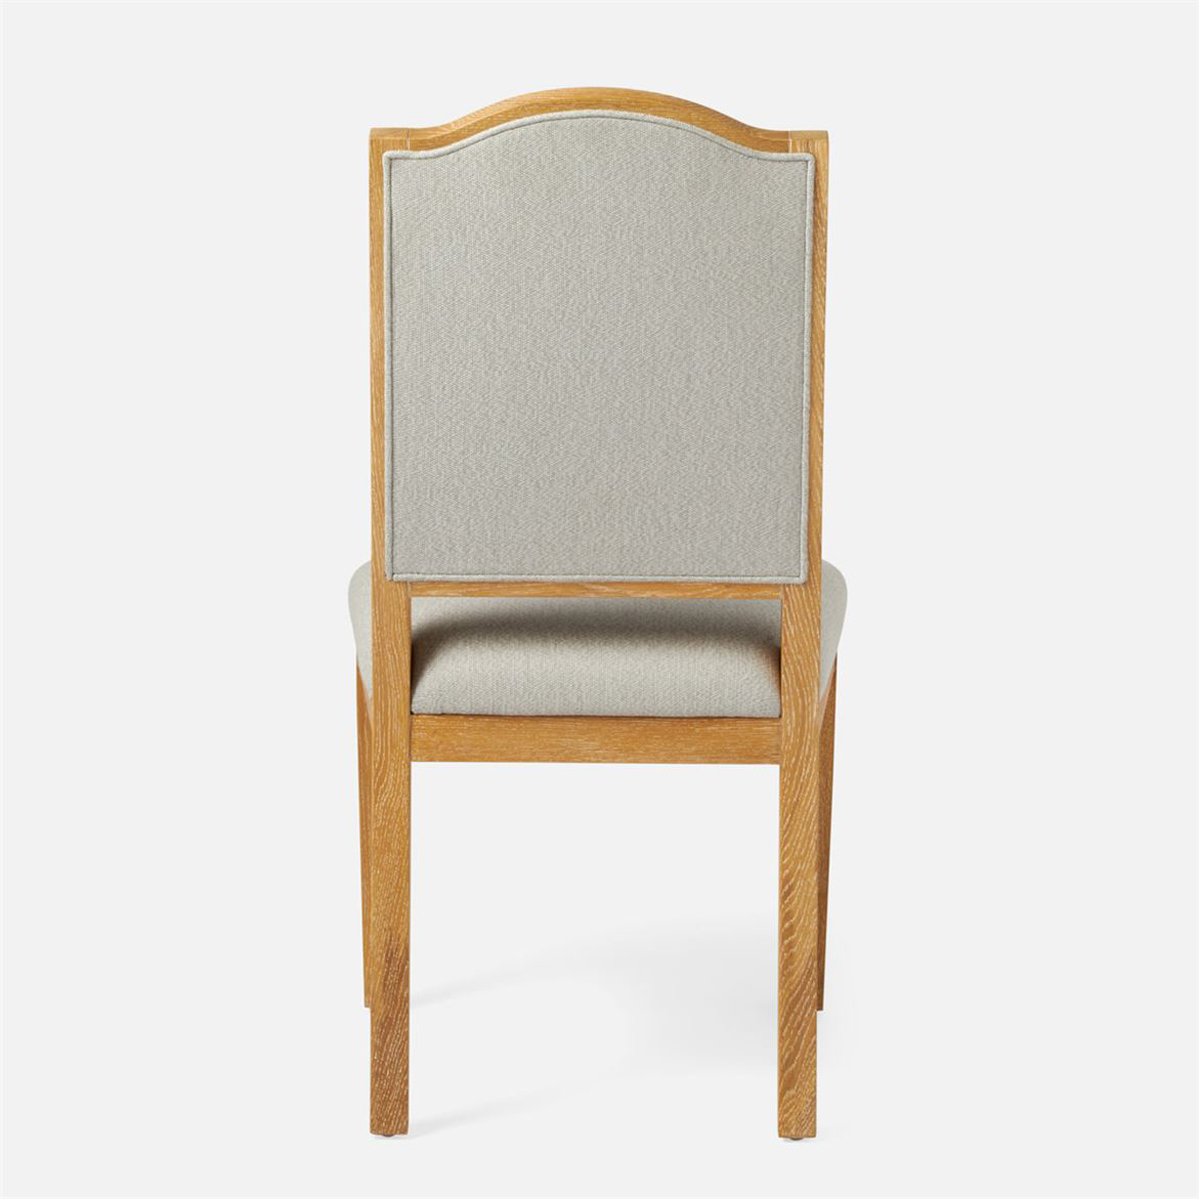 Made Goods Salem Upholstered Dining Chair in Nile Fabric